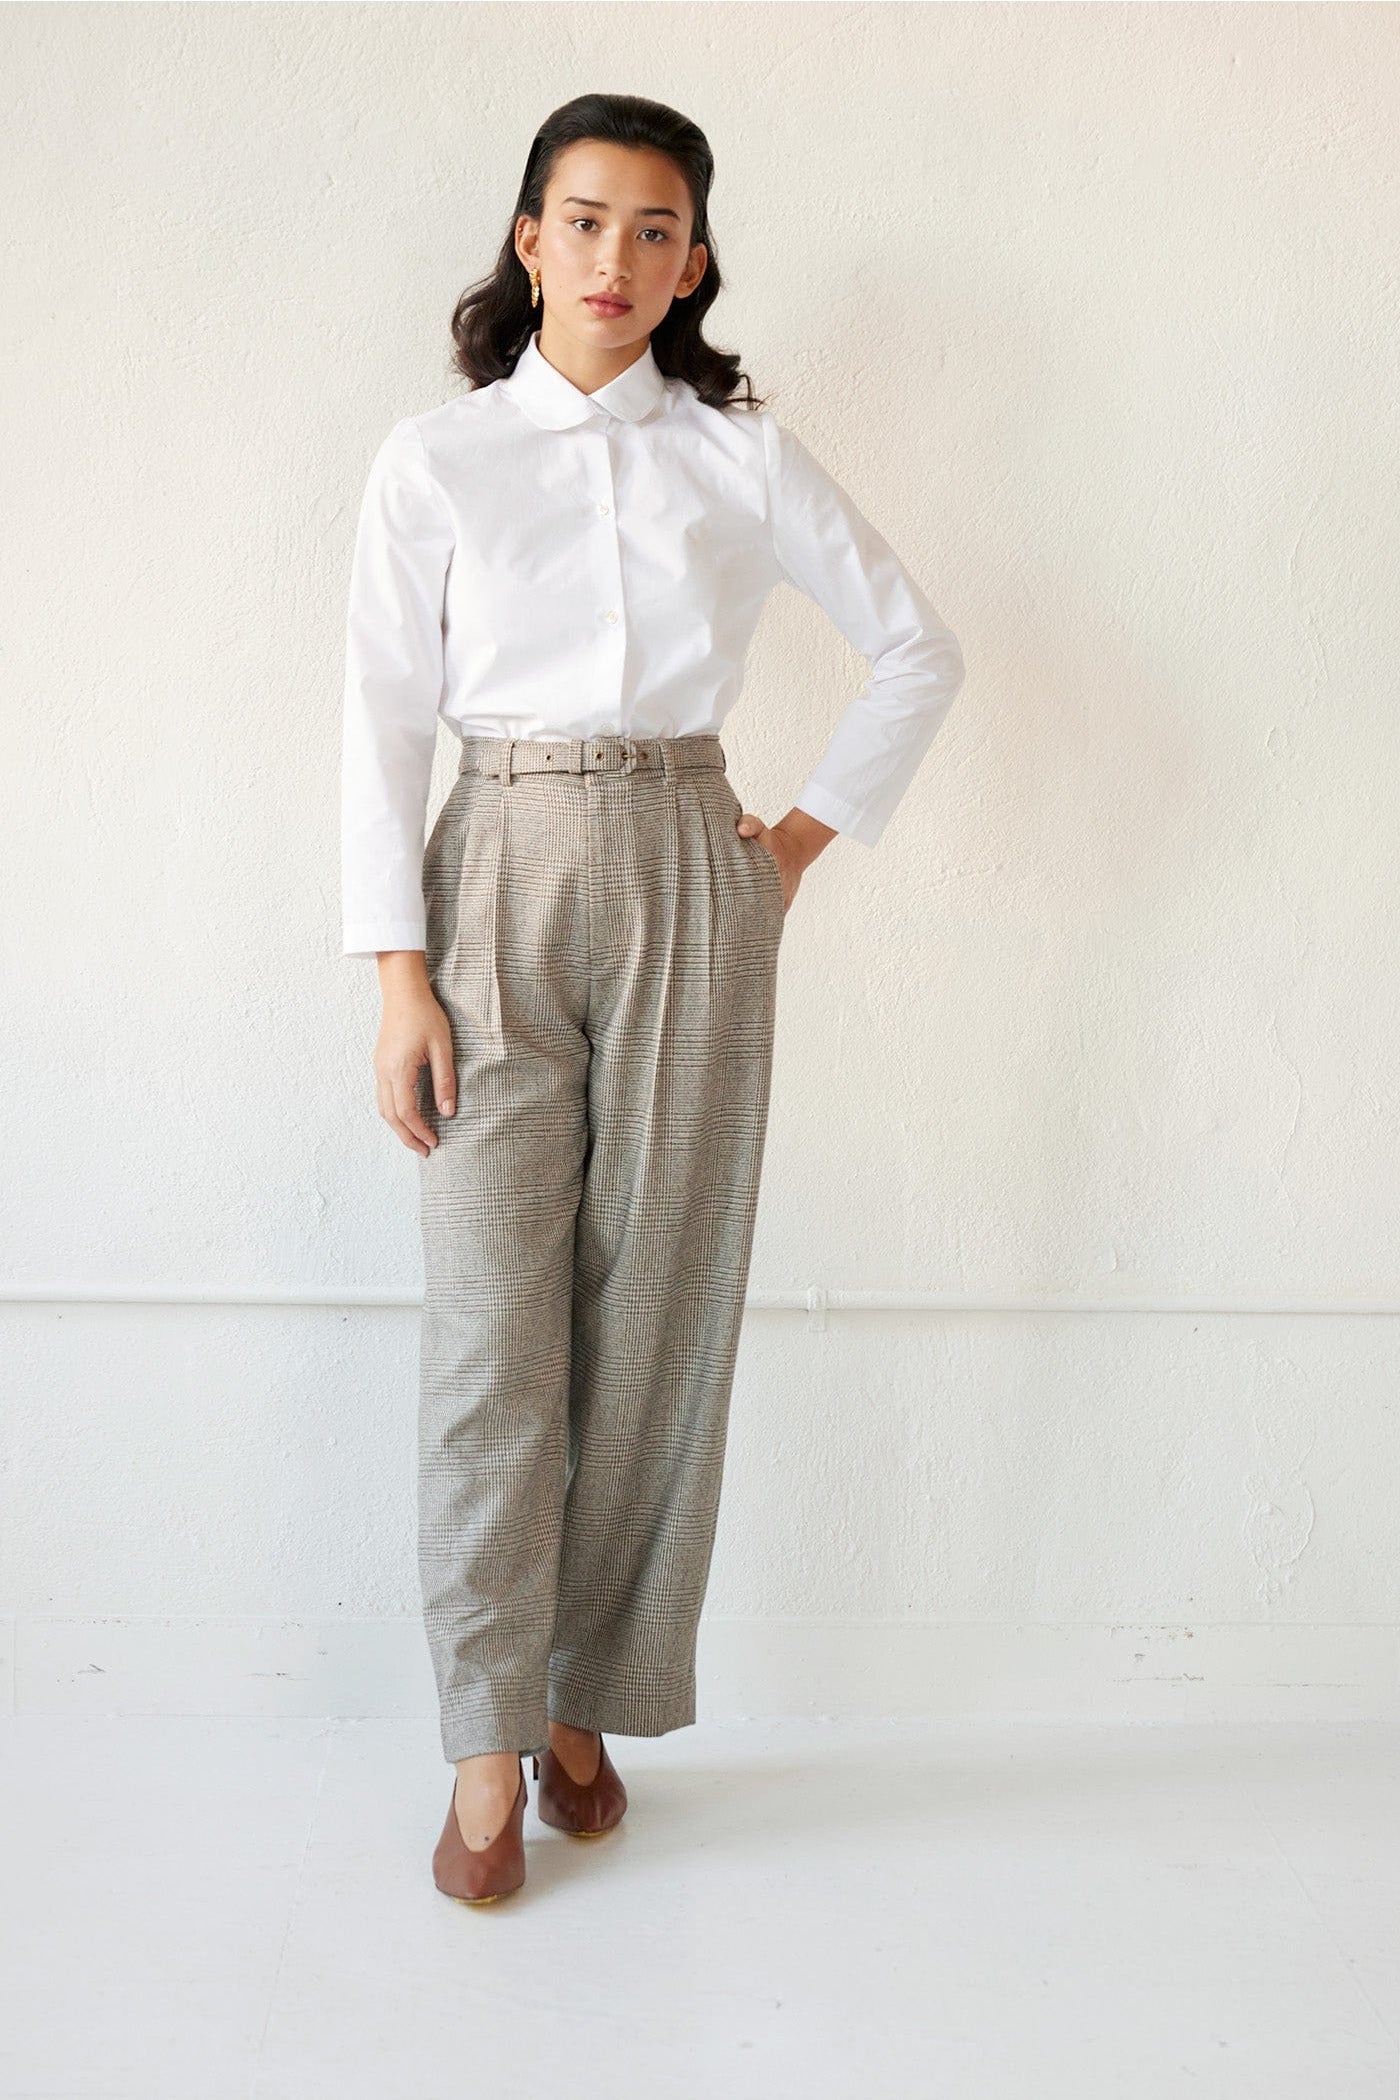 Binty Blouse in White Cotton Blouses CHRISTINE ALCALAY   